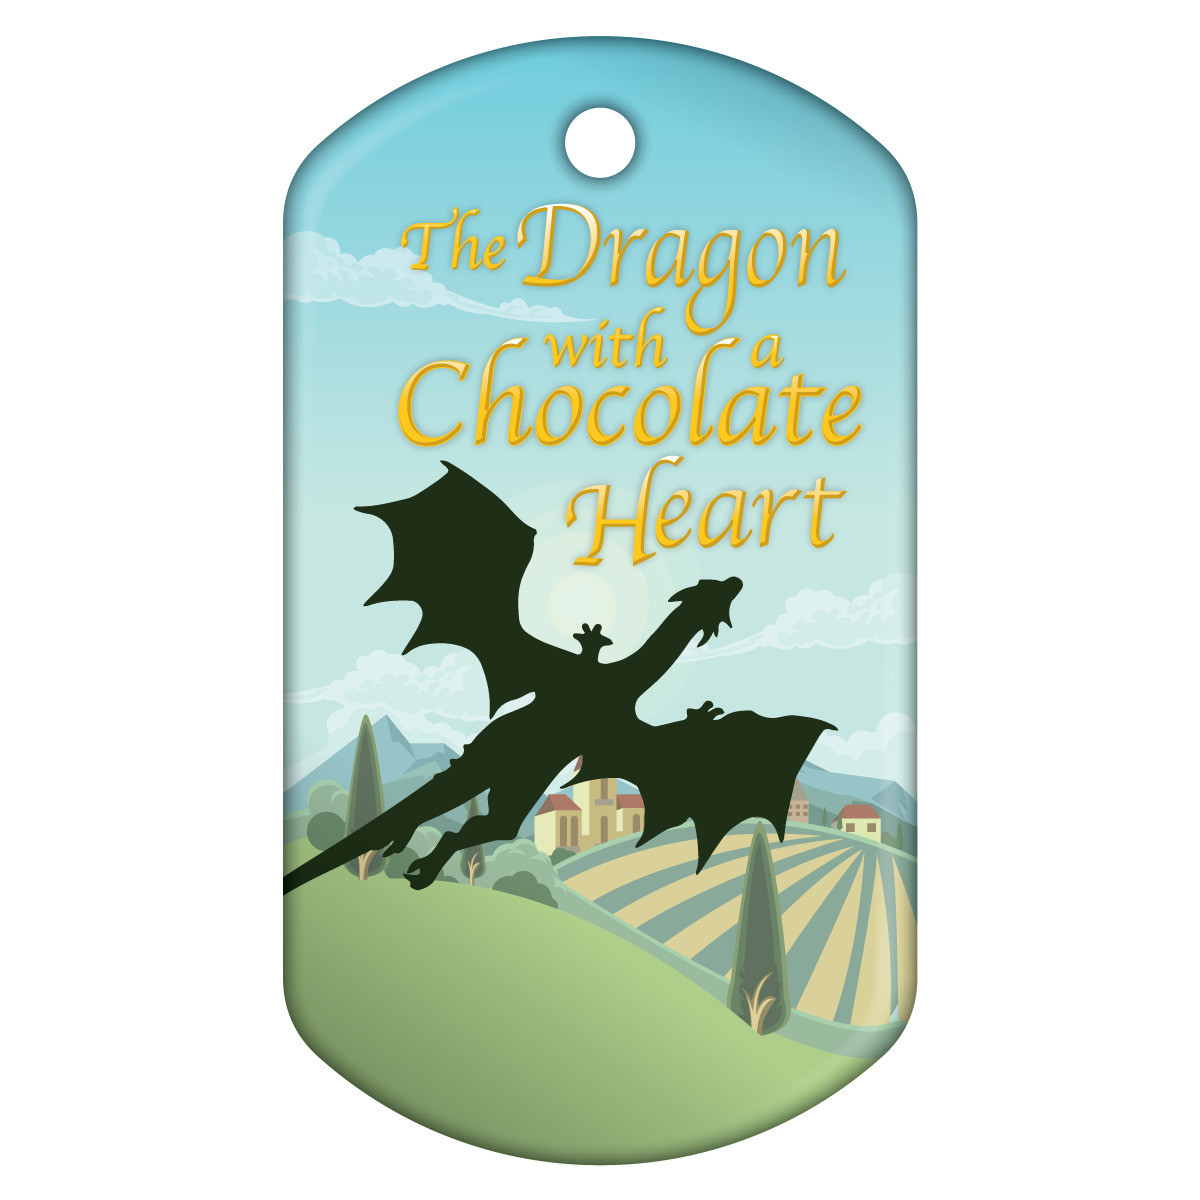 Dog Brag Tags - The Dragon with a Chocolate Heart